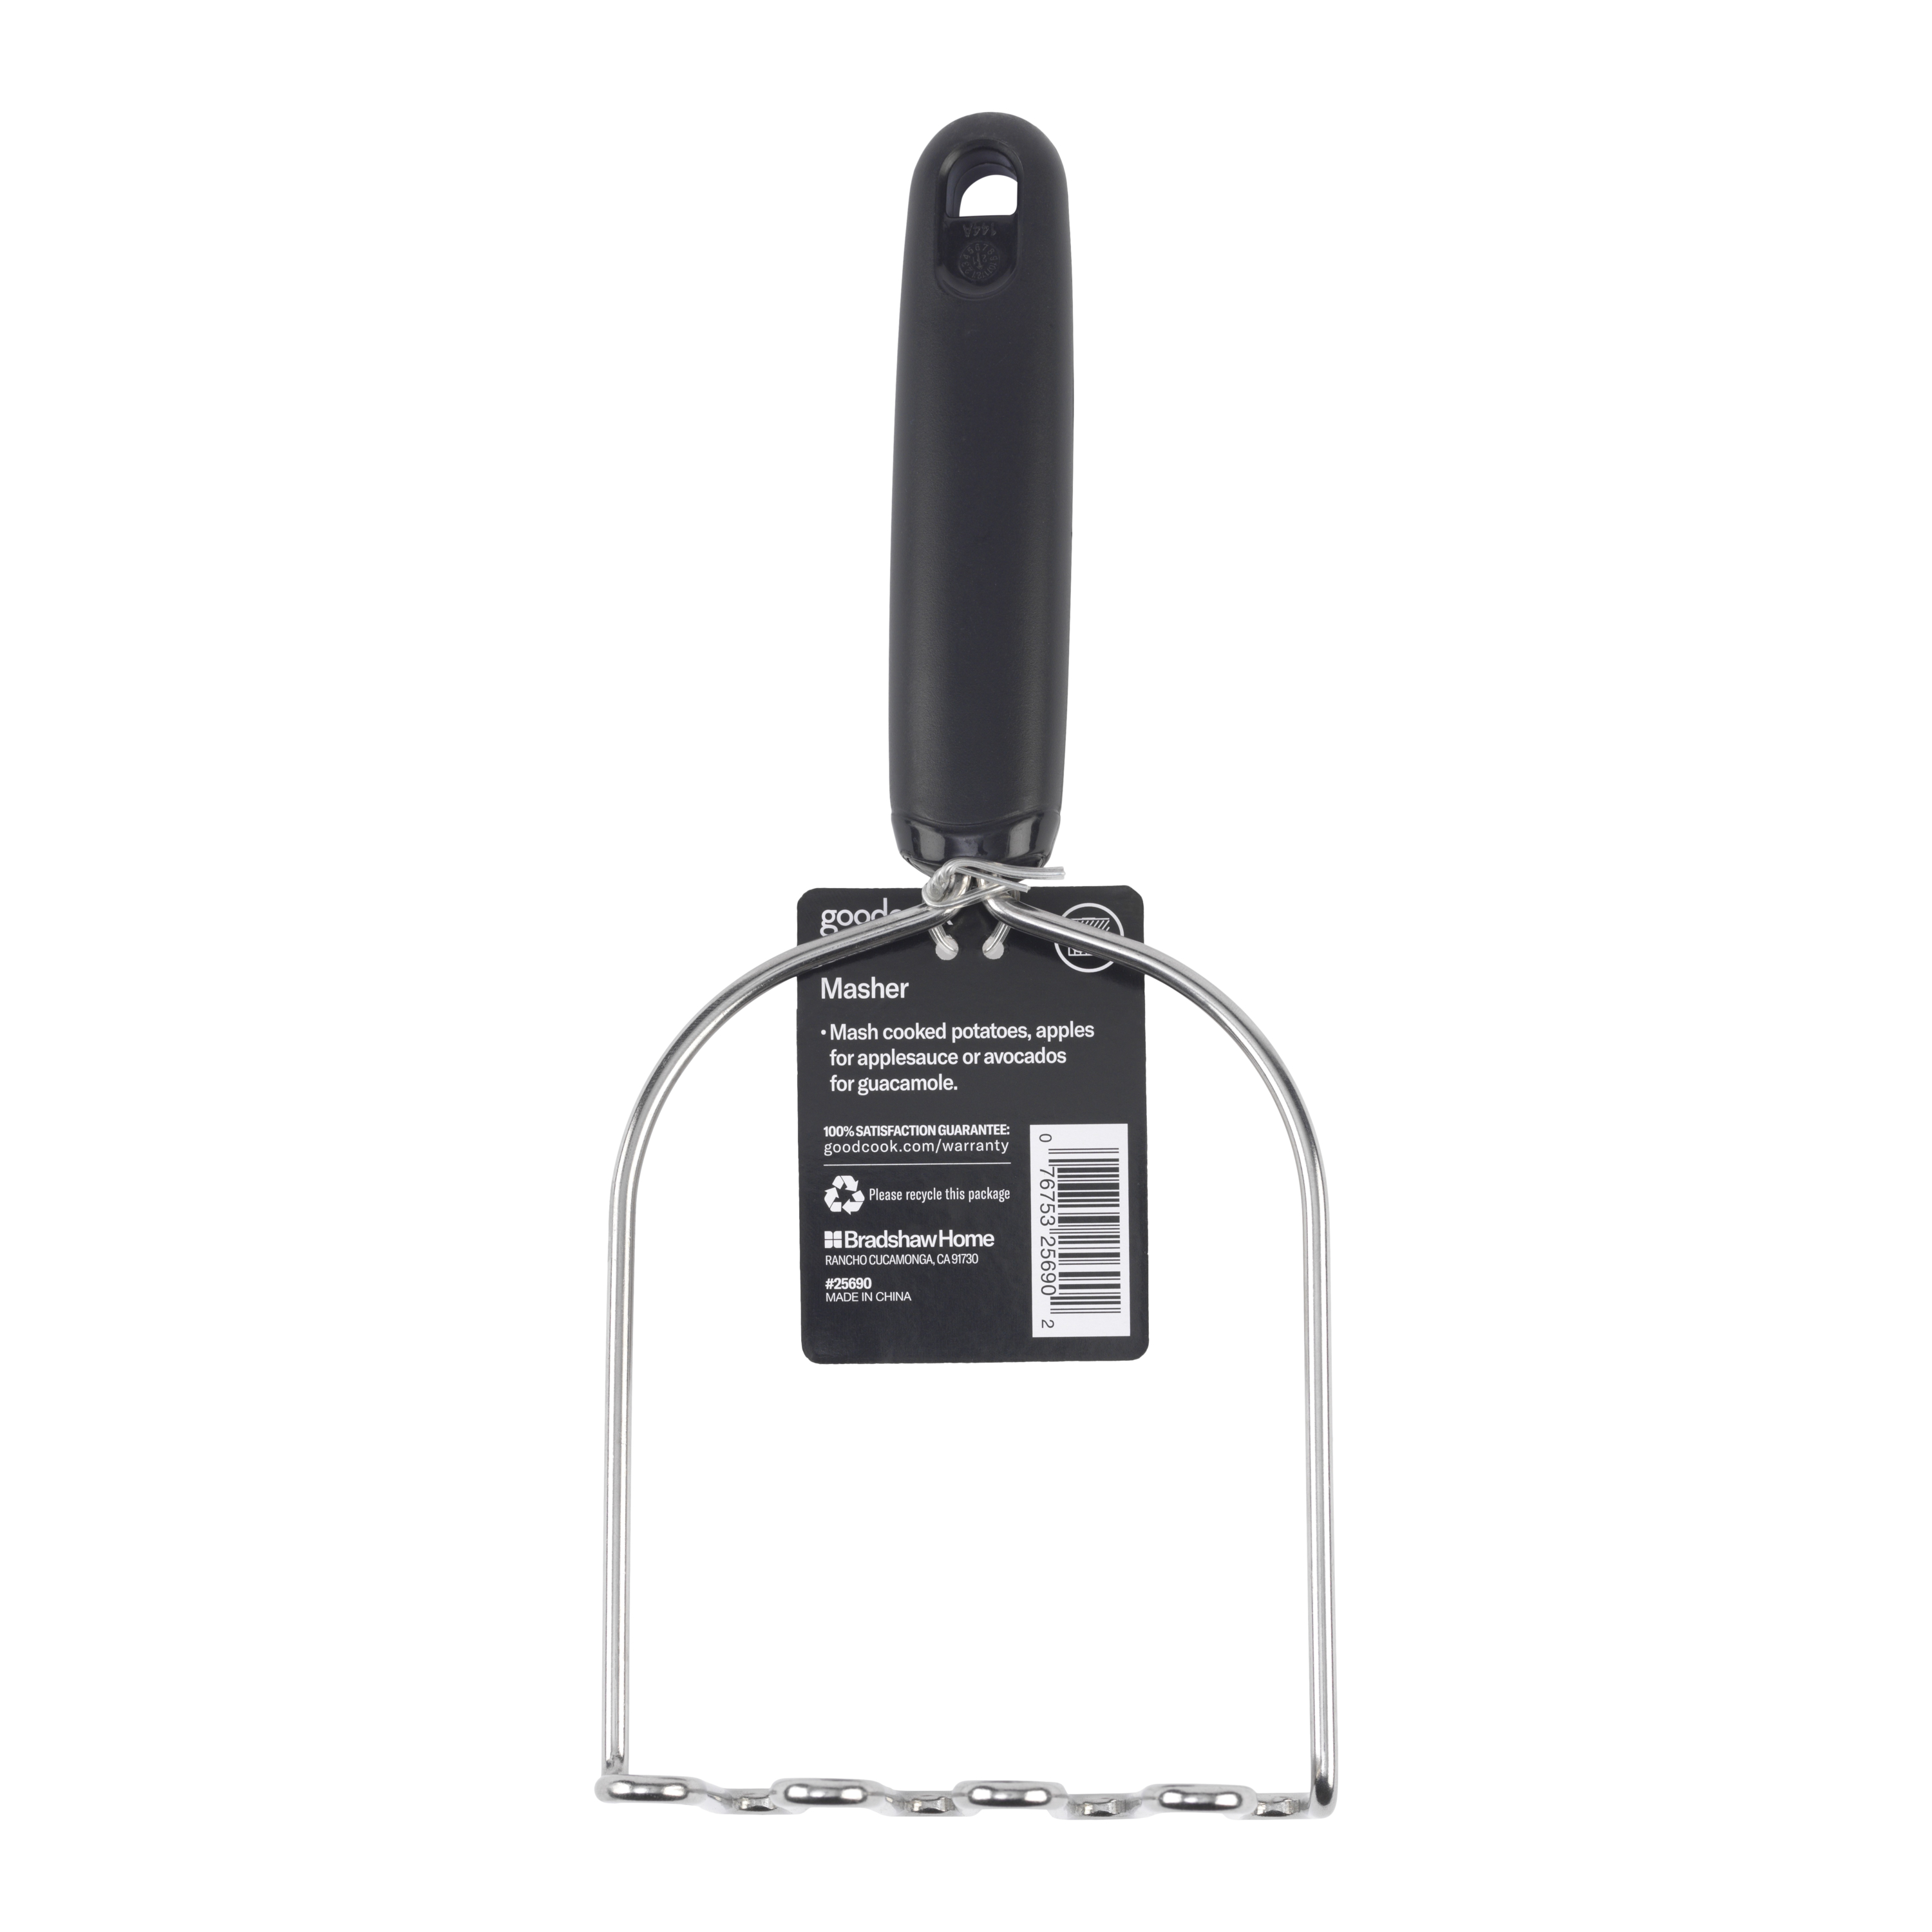 GoodCook 9.5" Stainless Steel Potato Masher and Meat Chopper Tool, Silver/Black - image 4 of 5